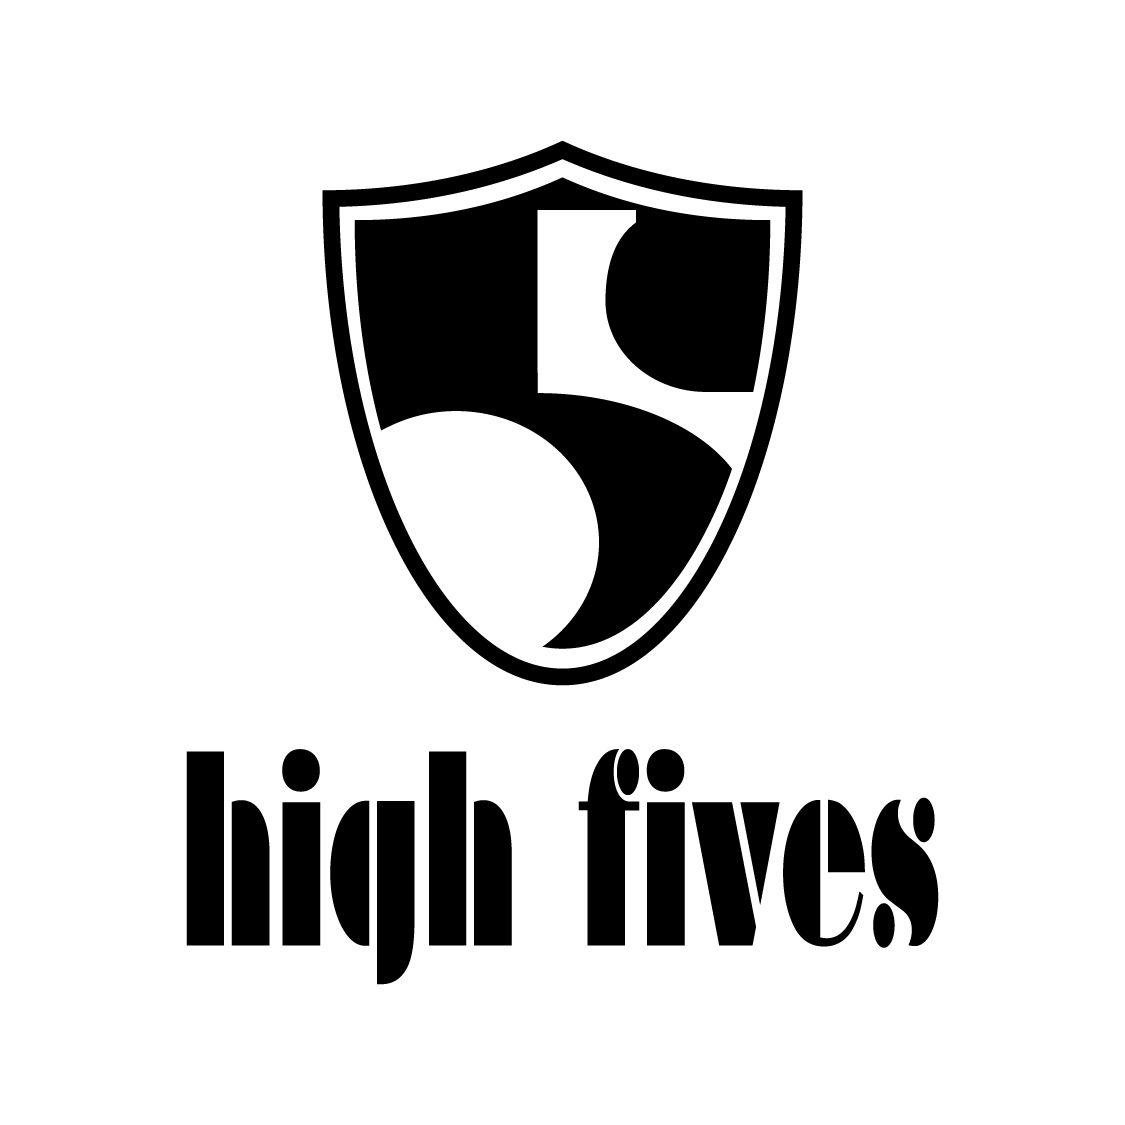 Five S Logo - High Fives Foundation Throws Charity Golf Tournament